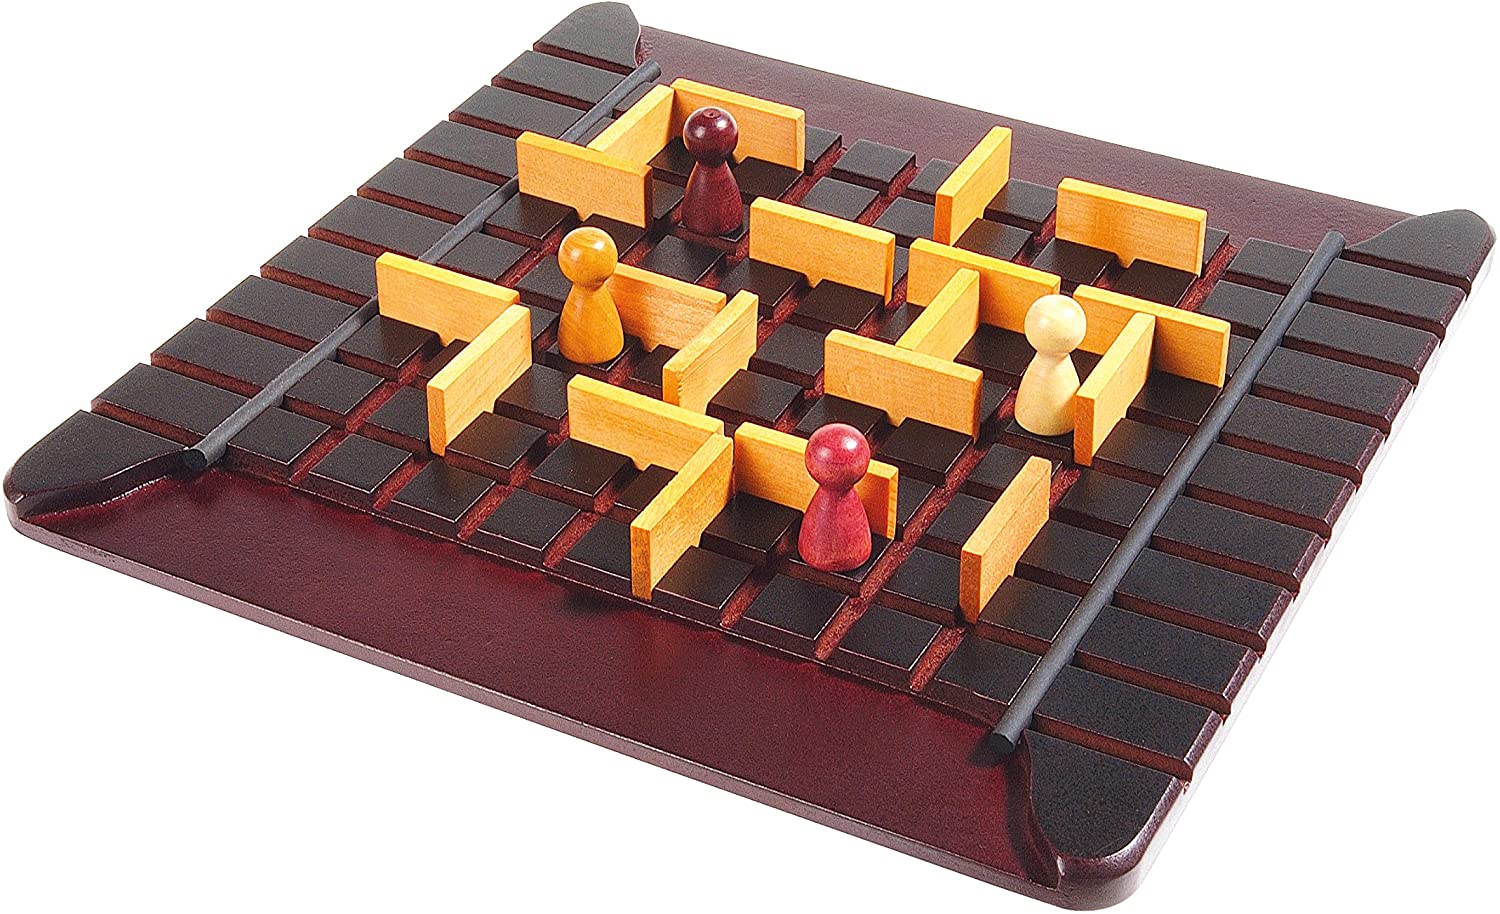 quoridor board game with playing pieces; strategy board game